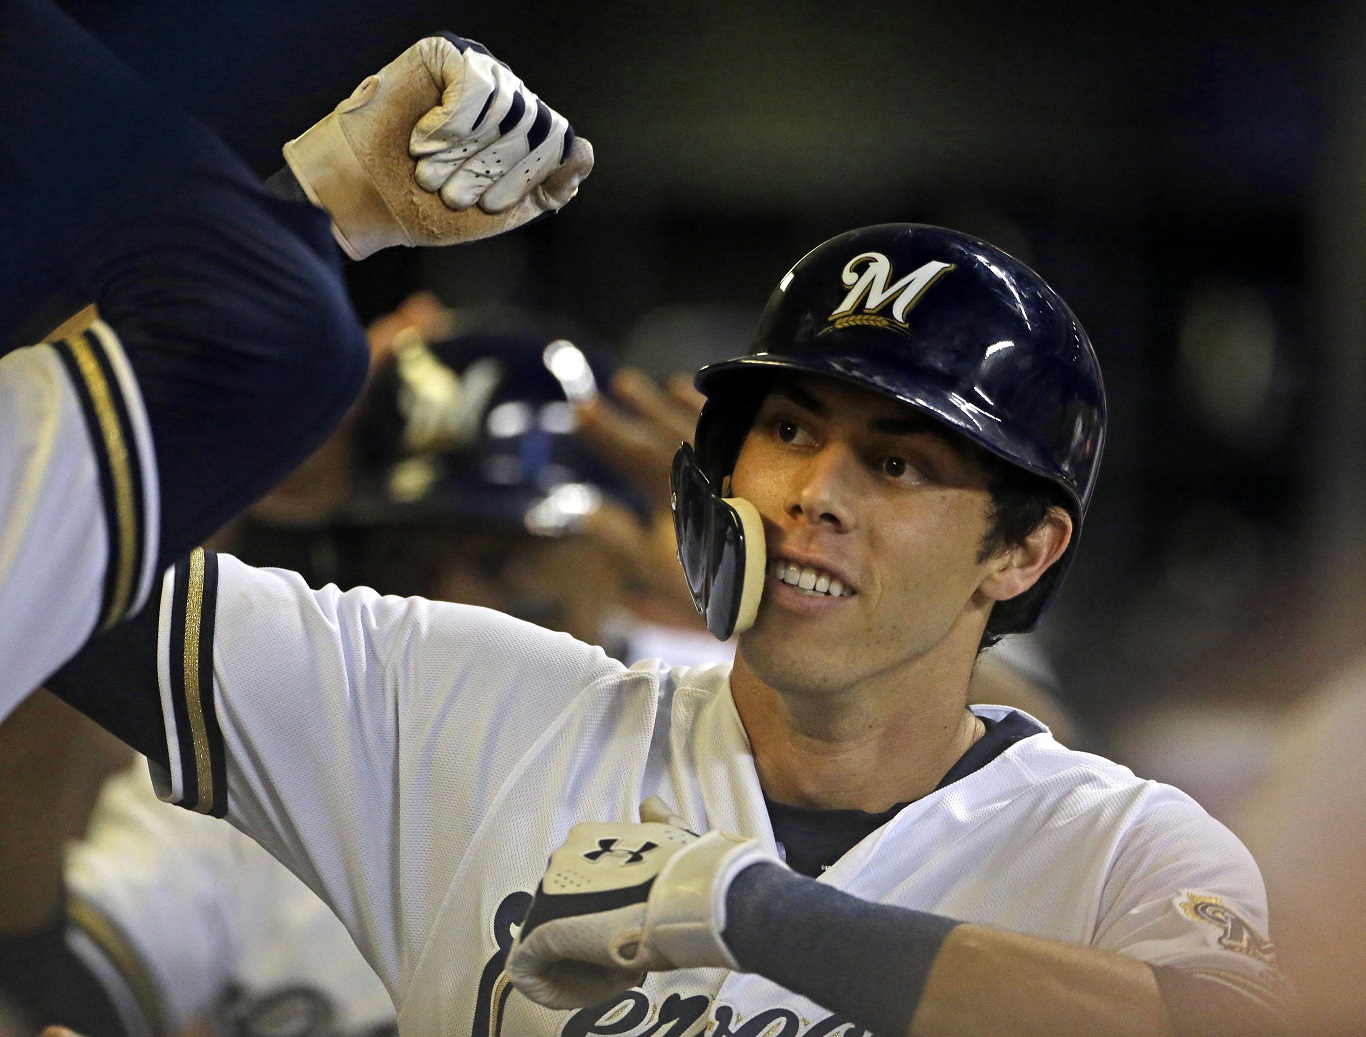 Yelich getting close, but unlikely to play Friday when Brewers host Mets